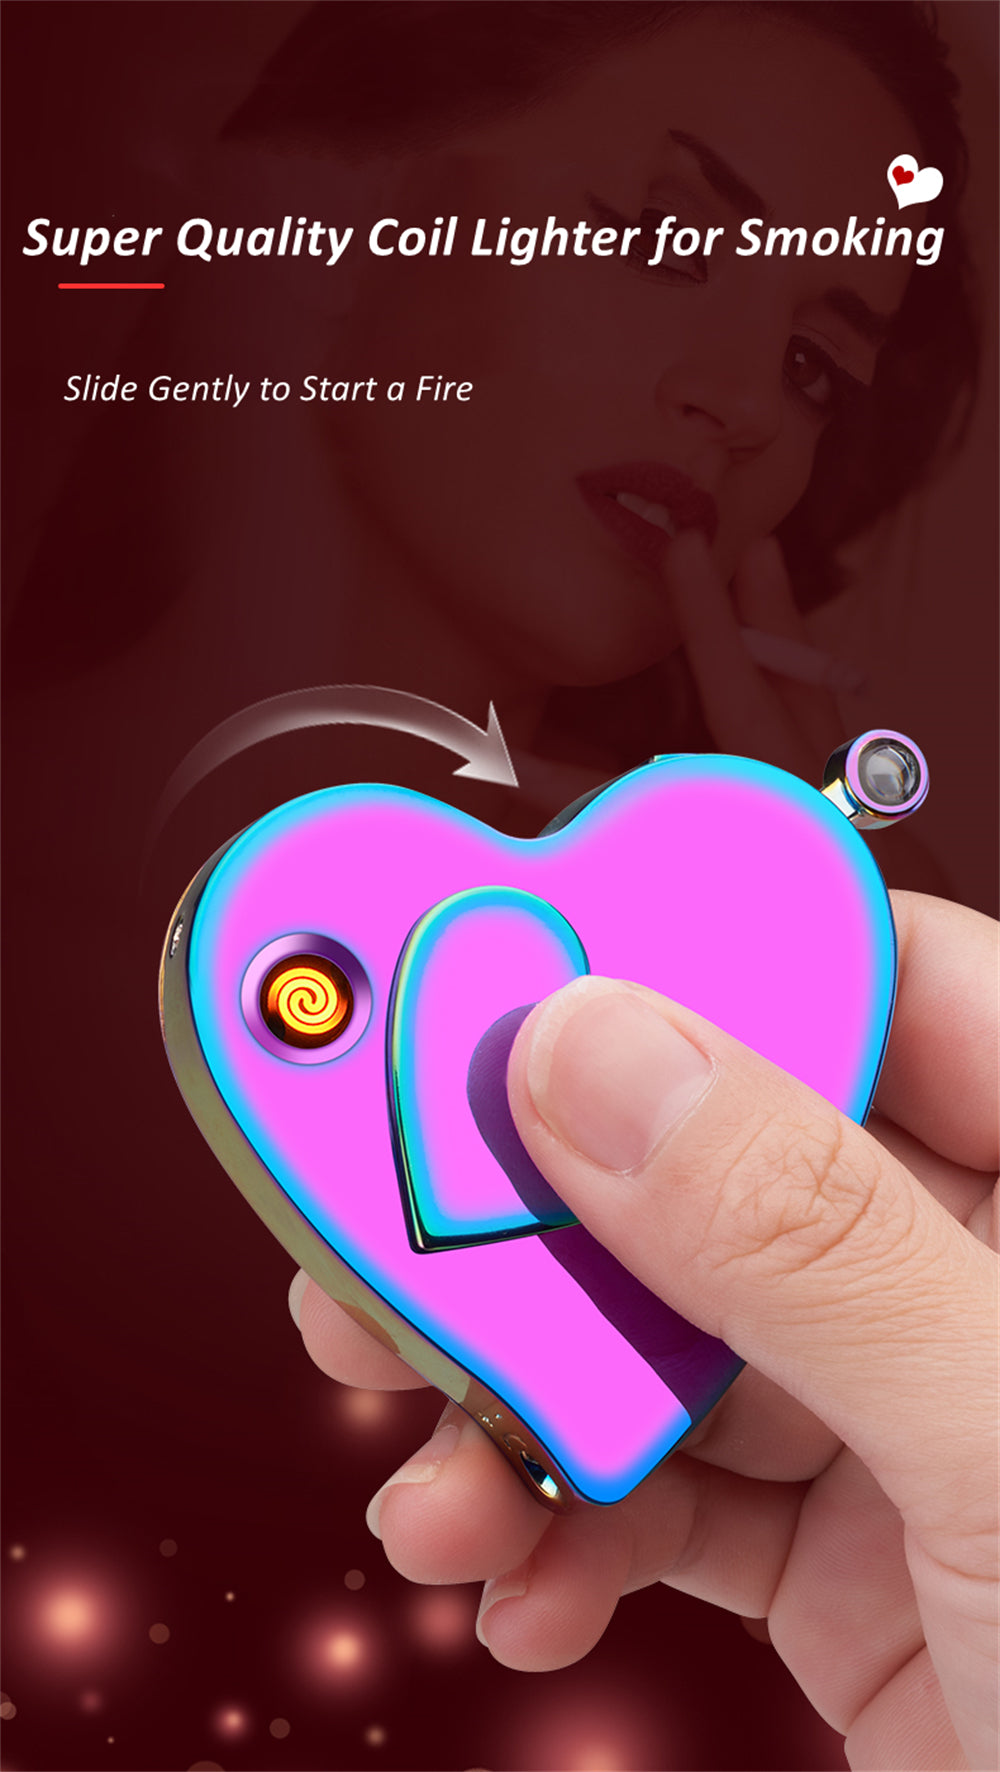 Dual Burner Butane Refillable Jet Torch and ARC Electronic Heart-shaped Lighter